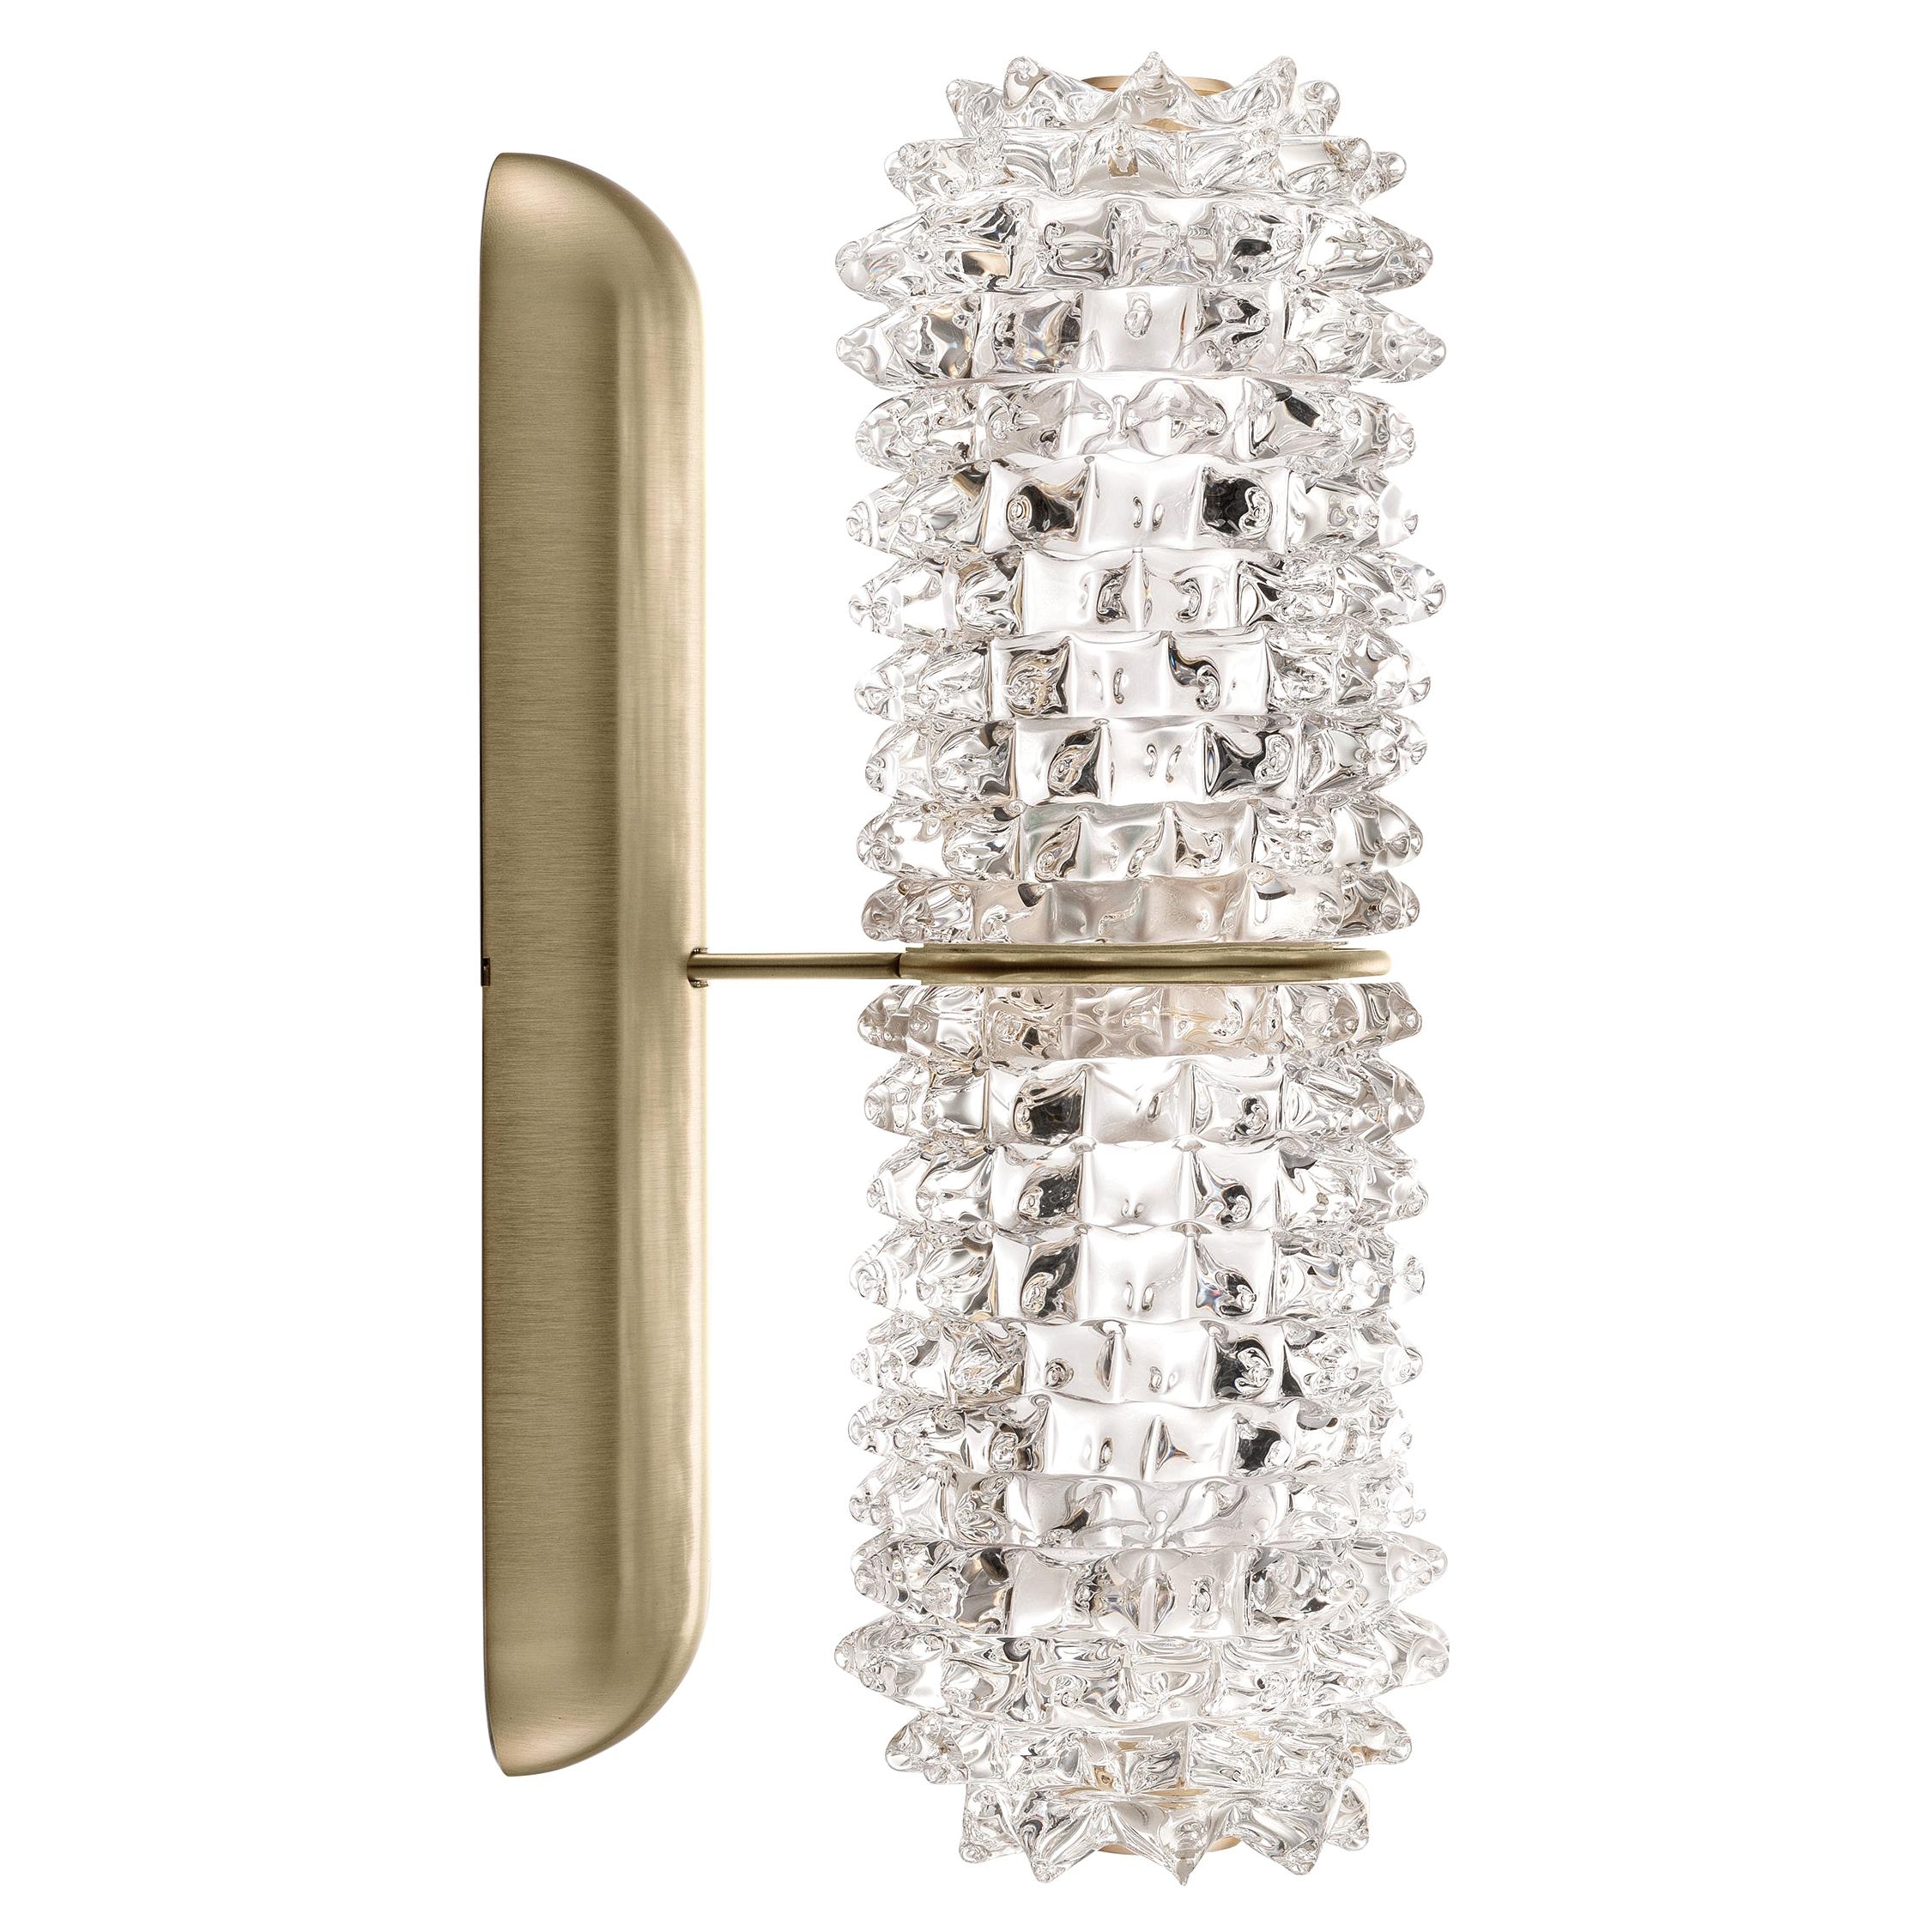 Barovier & Toso Opera 7389 Wall Sconce in Crystal with Black Nickel Finish